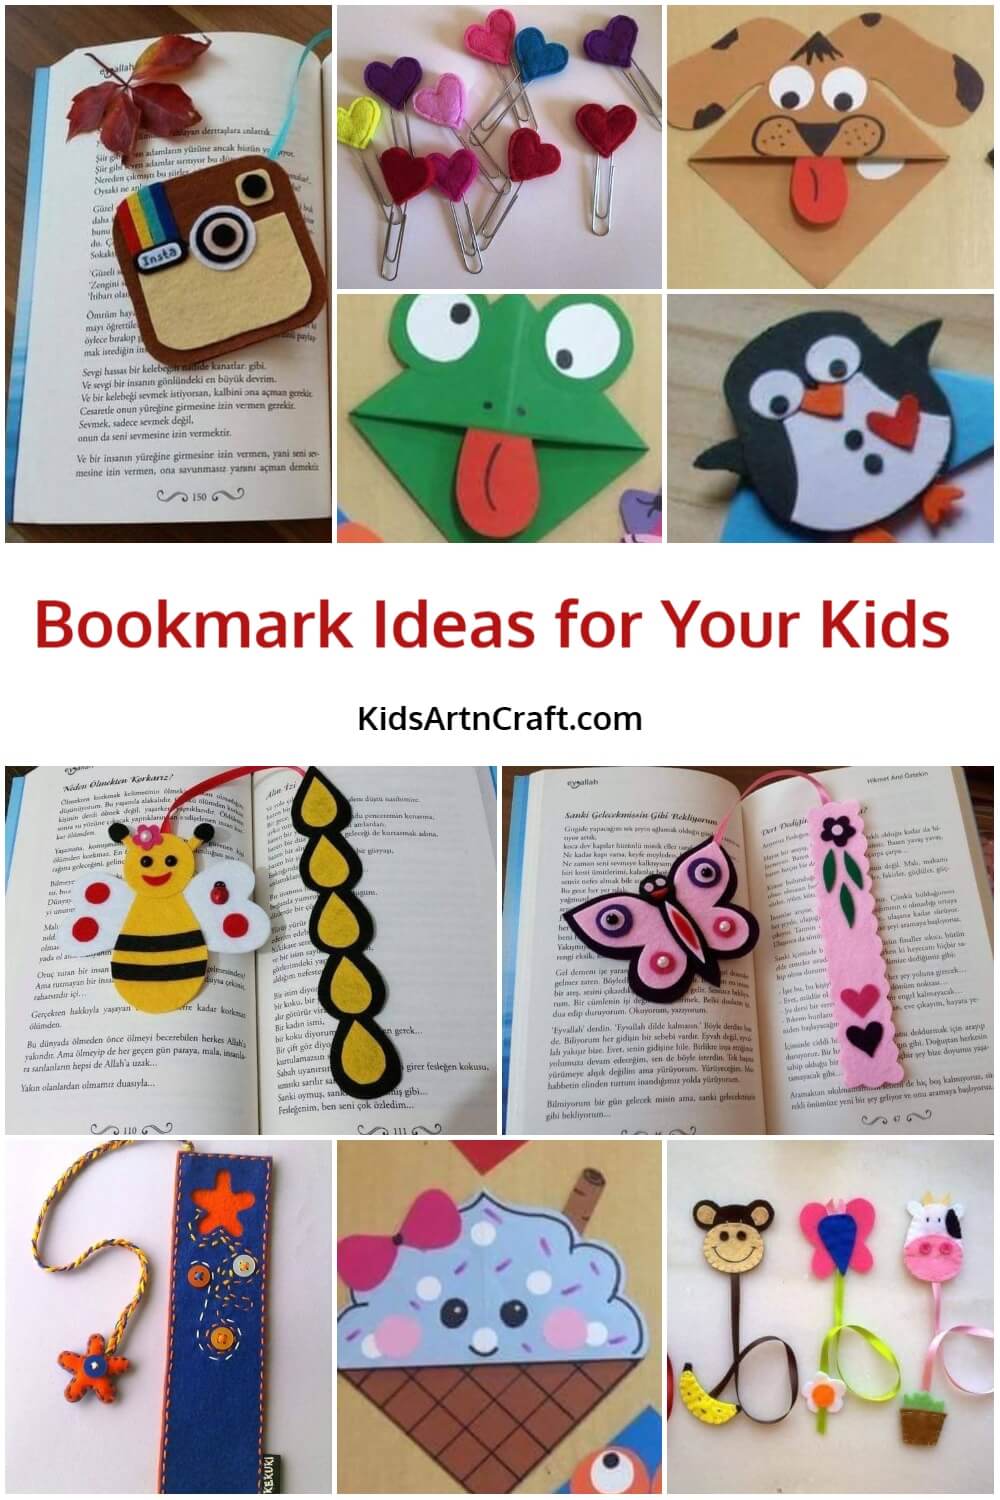 Simple Bookmark Ideas for Kids